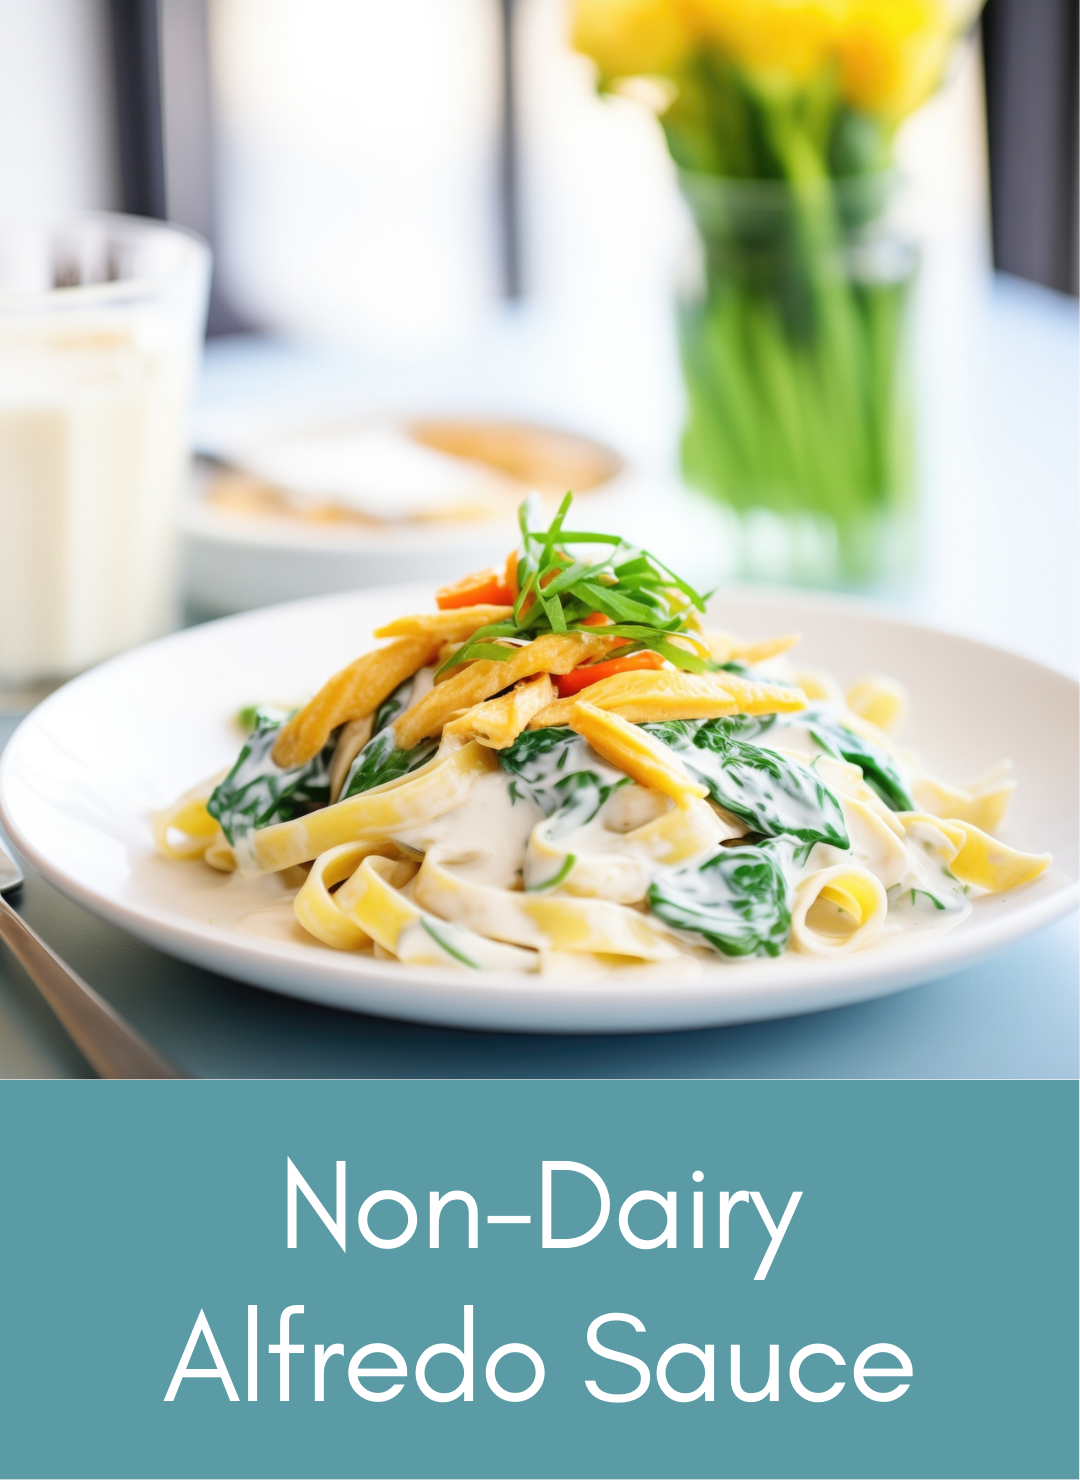 Dairy free vegan Alfredo sauce Picture with link to recipe